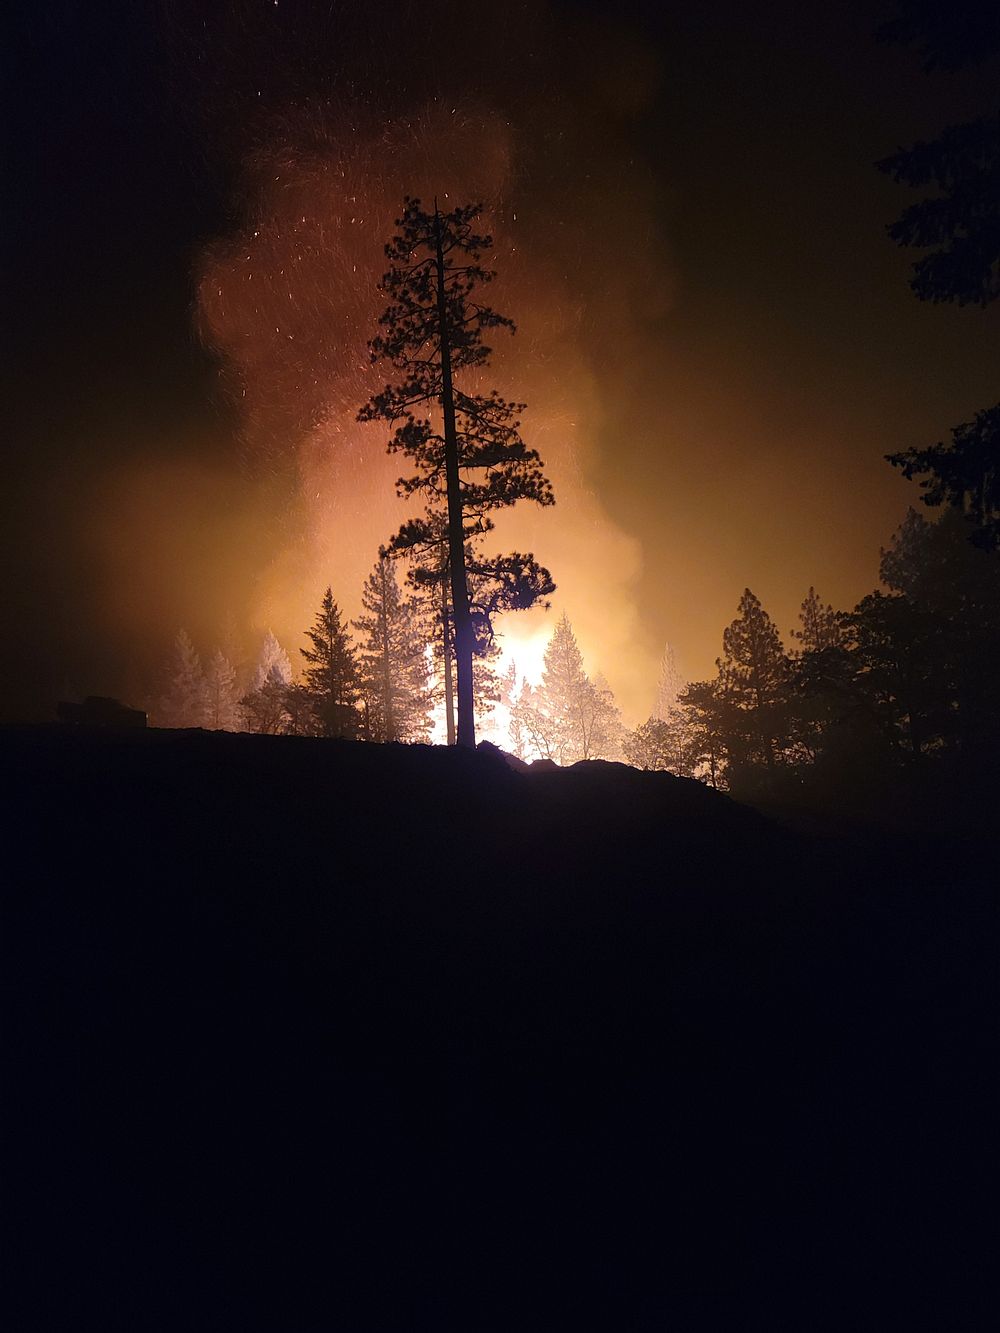 Forest fire breakout, night view. Original public domain image from Flickr